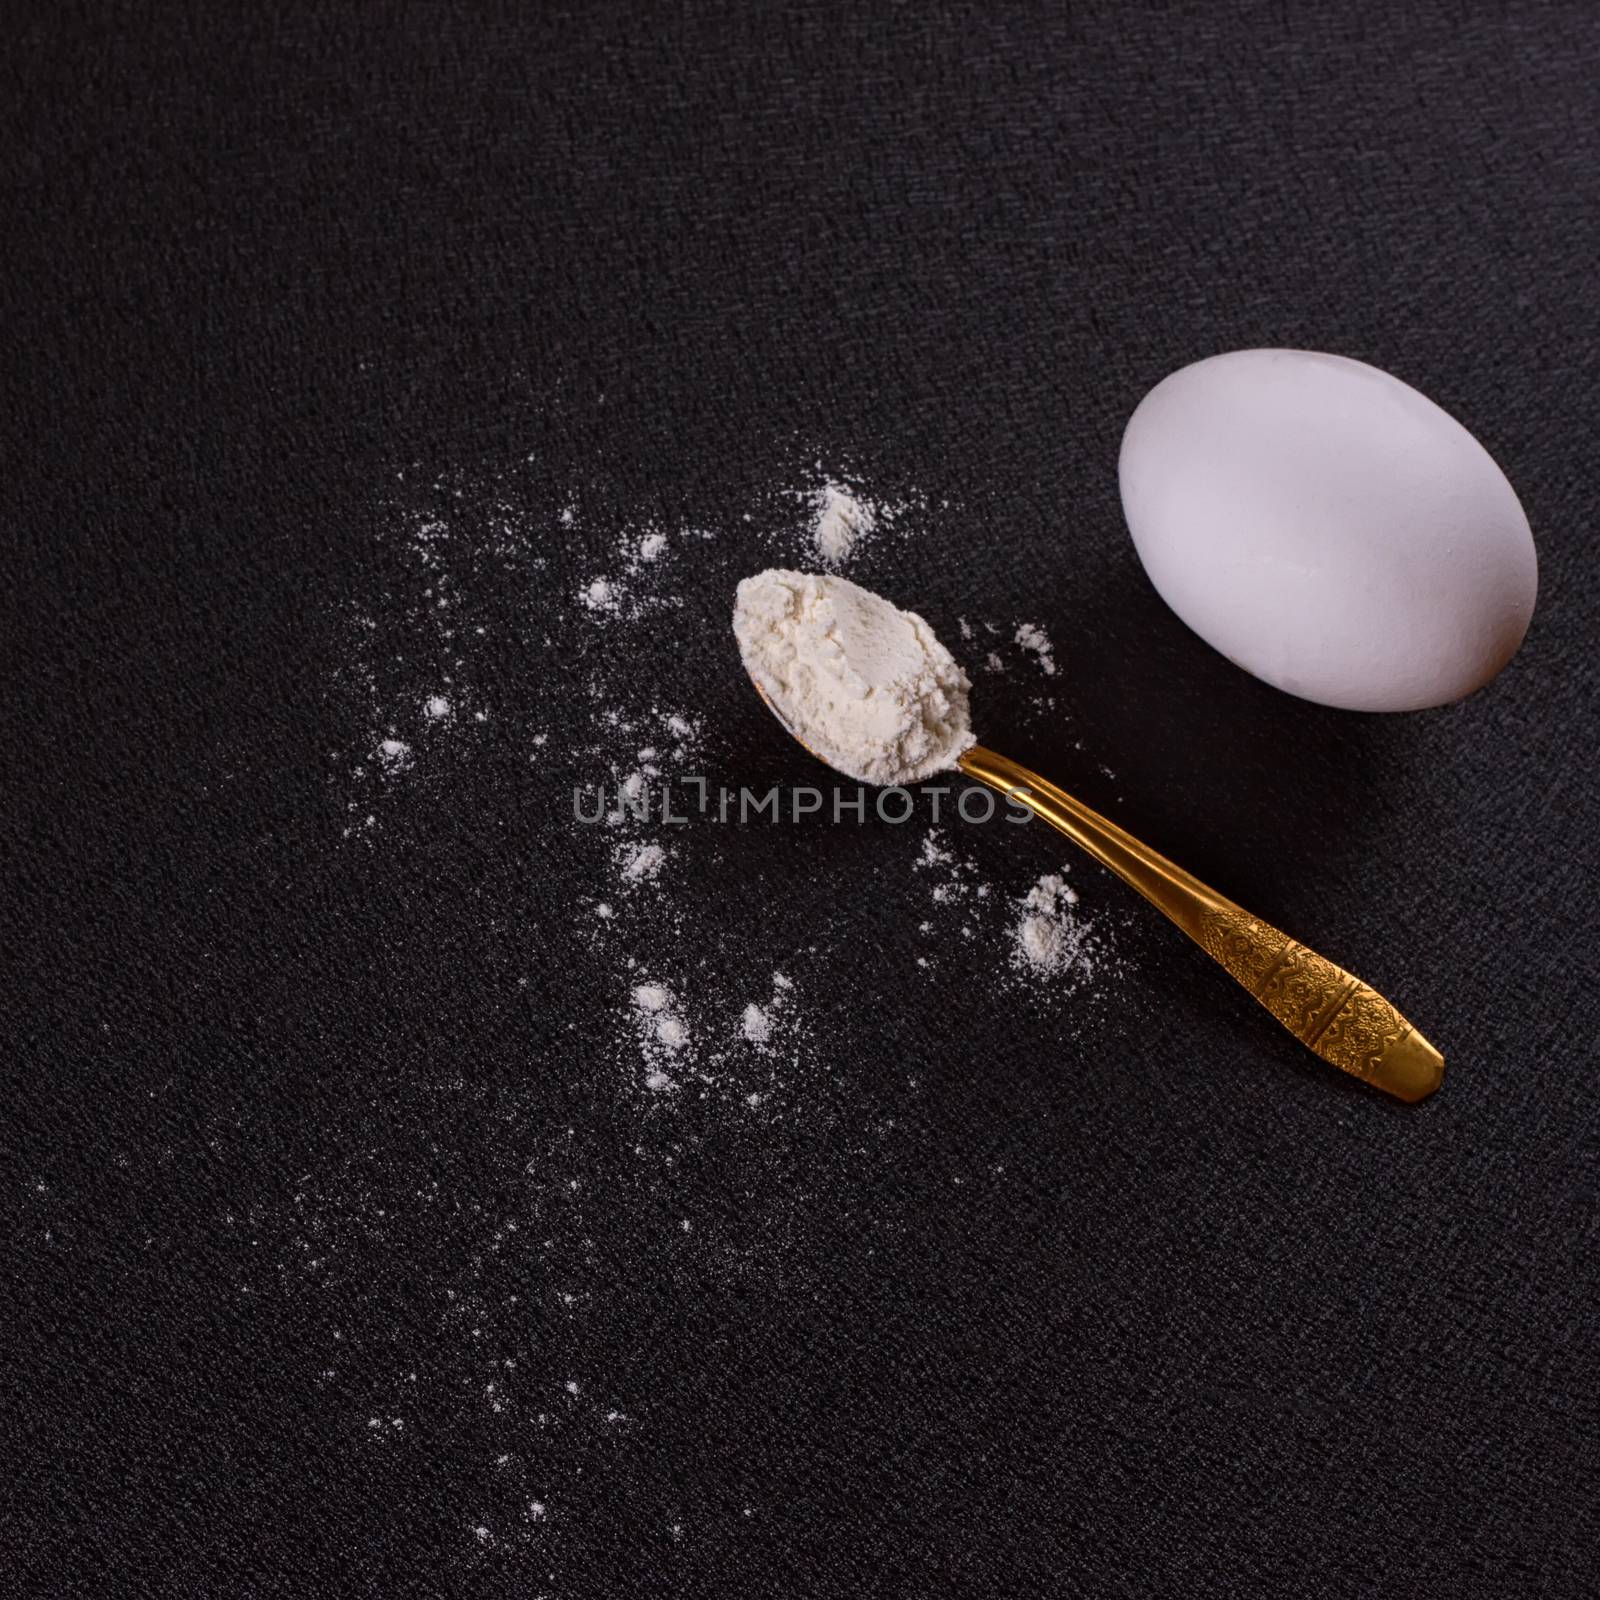 Gold-plated spoon, flour, egg on a black background